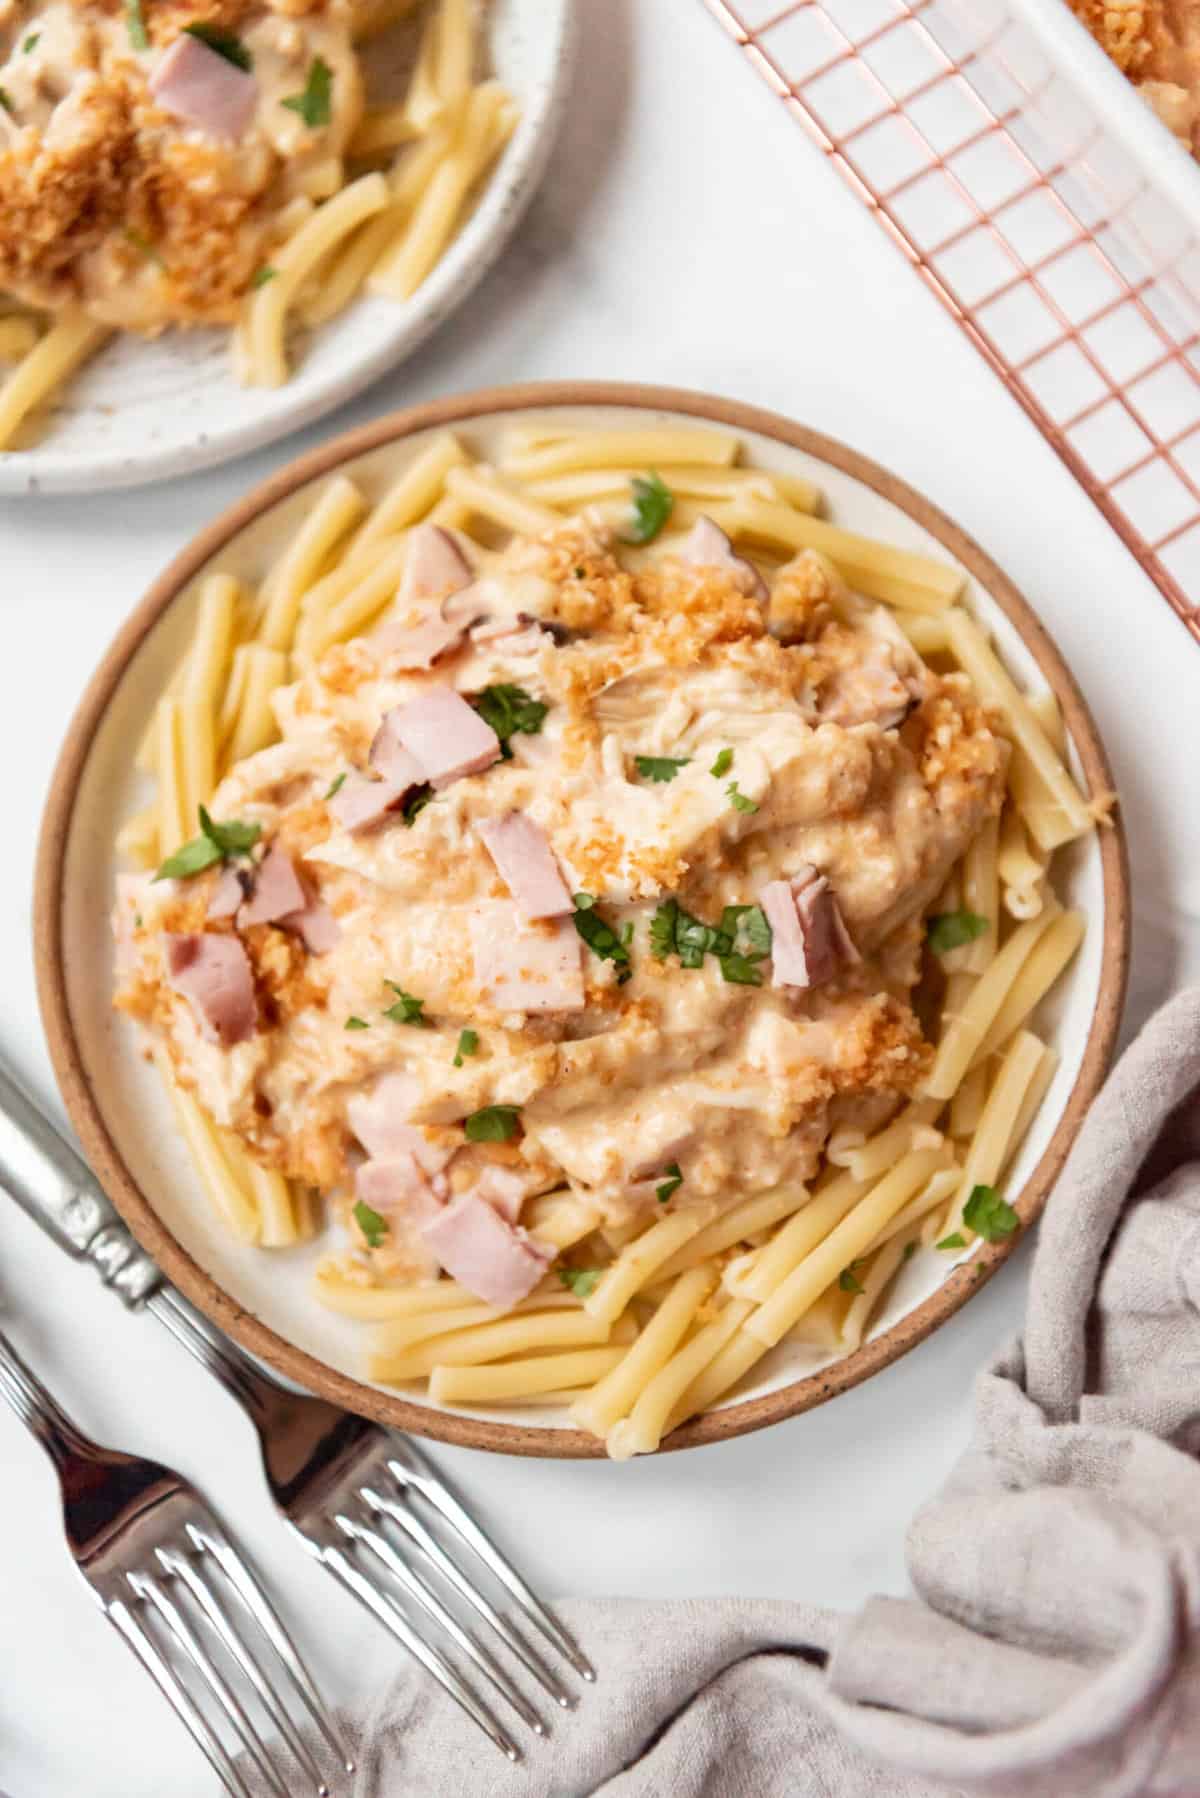 A large plate of chicken cordon bleu casserole served over cooked pasta.